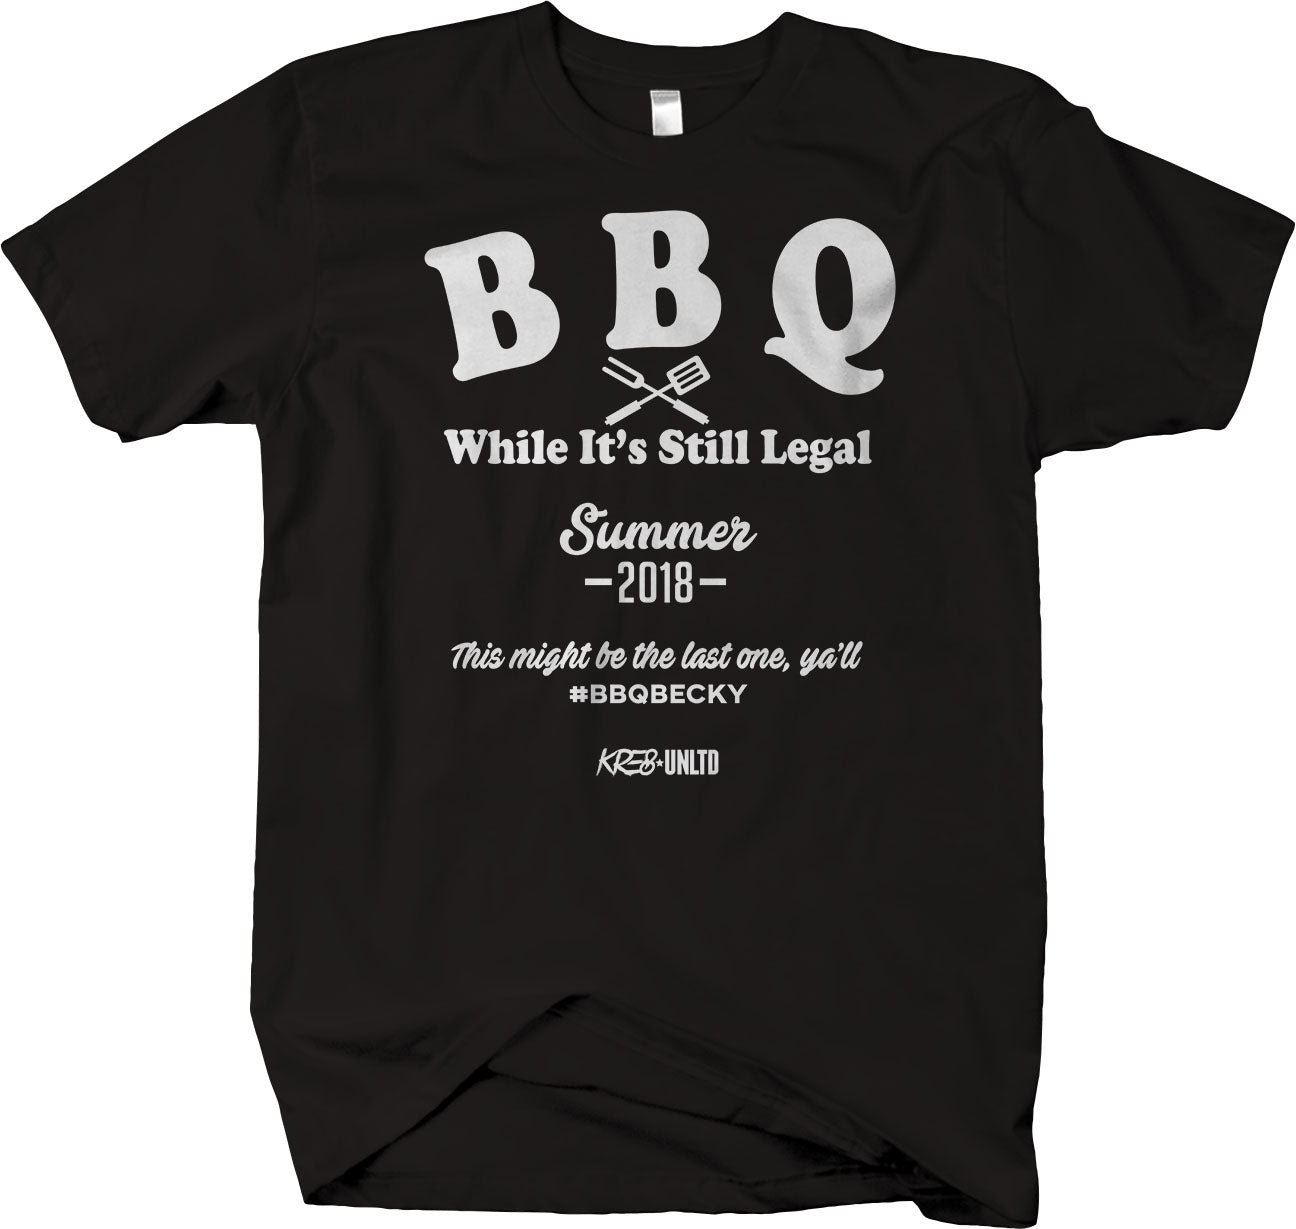 BBQ While It's Still Legal short sleeve #BBQBecky Funny T-shirt - Larger Sizes